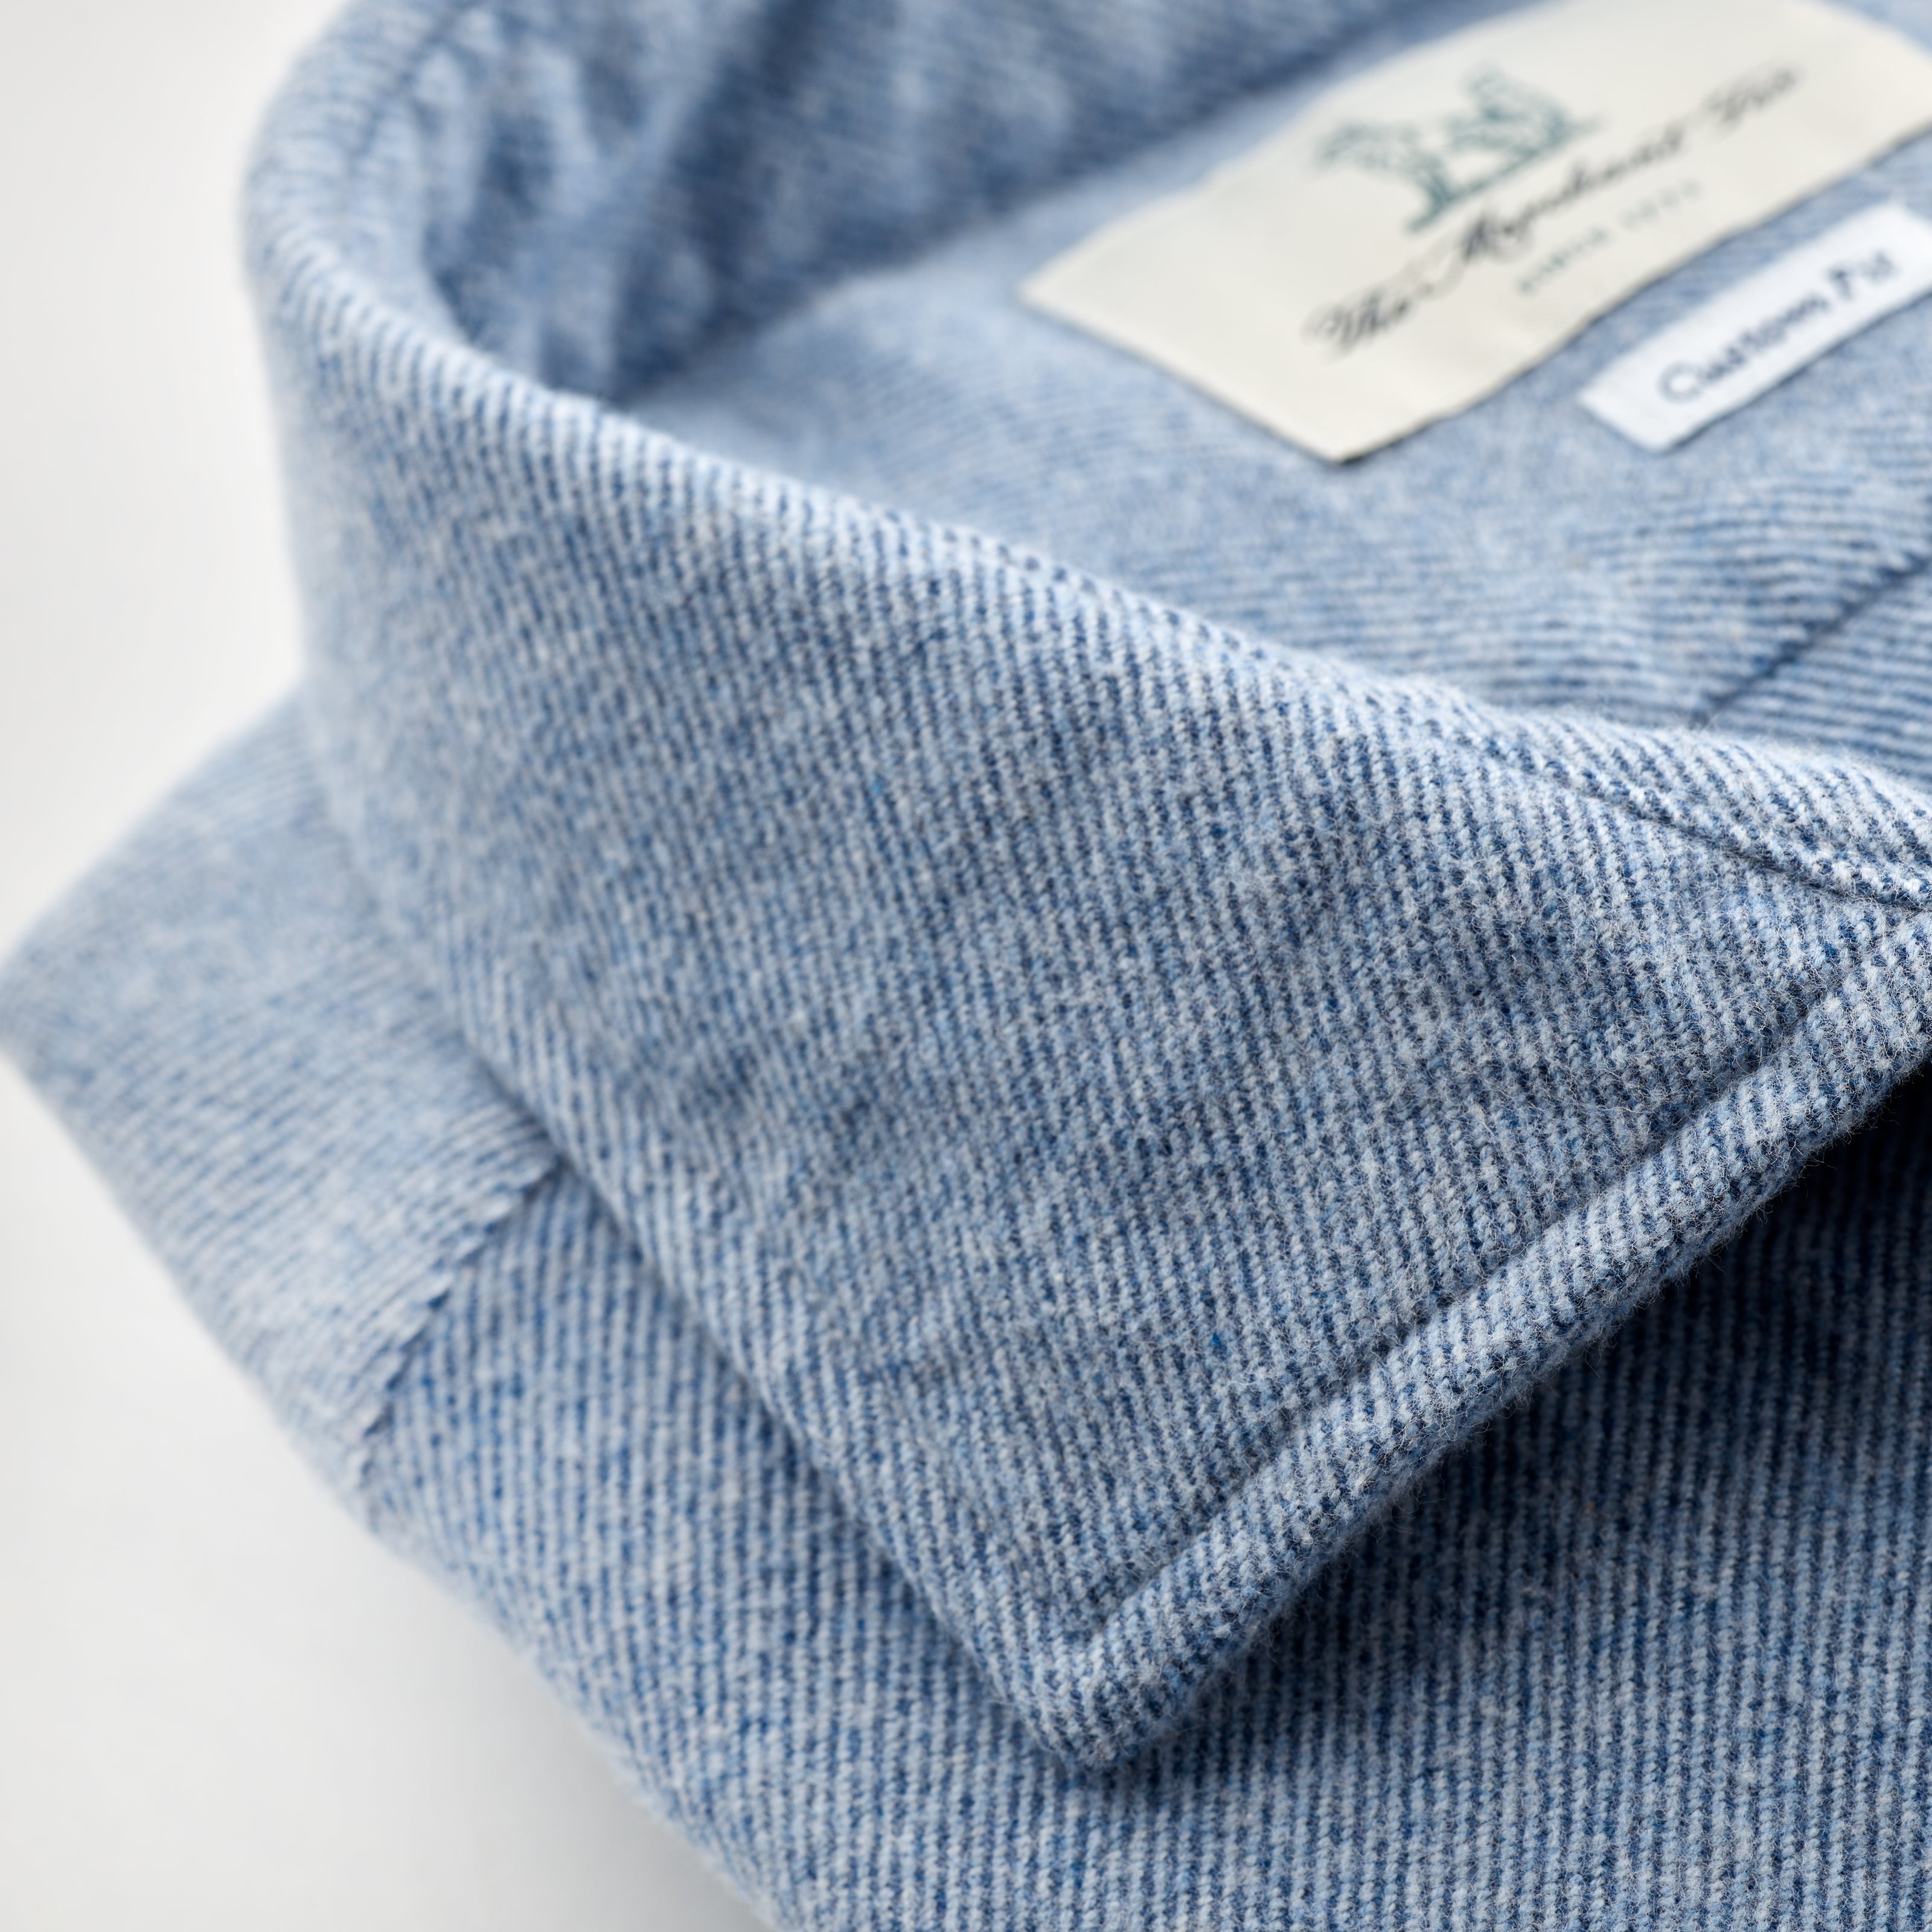 Double brushed spread collar shirt in denim blue